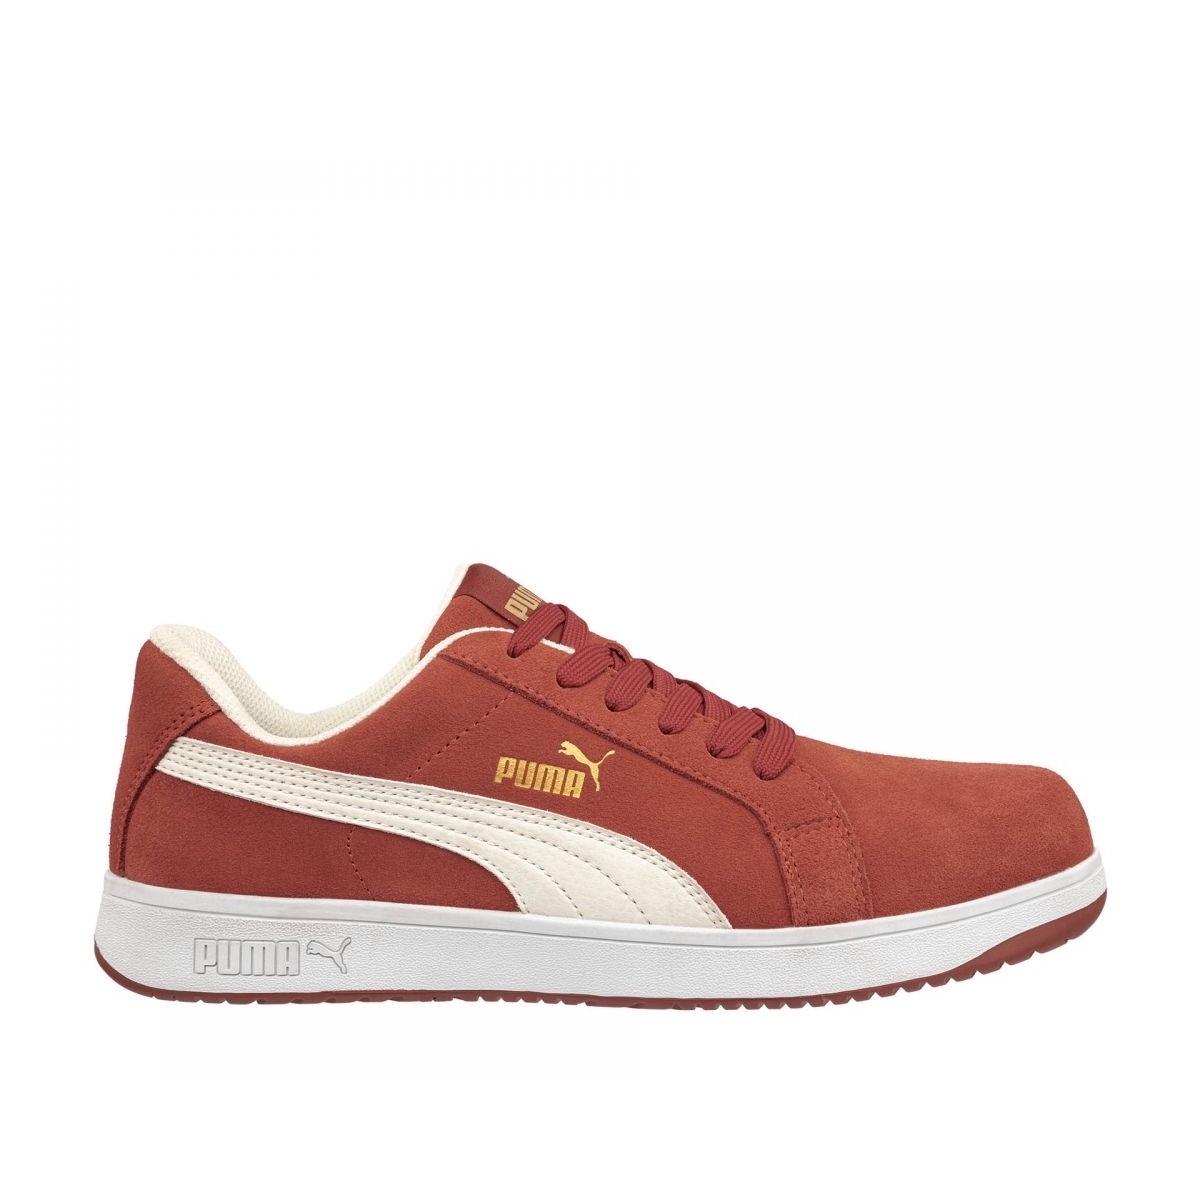 PUMA Safety Men's Iconic Low Composite Toe EH Work Shoes Red Suede - 640045 ONE SIZE RED - RED, 10.5